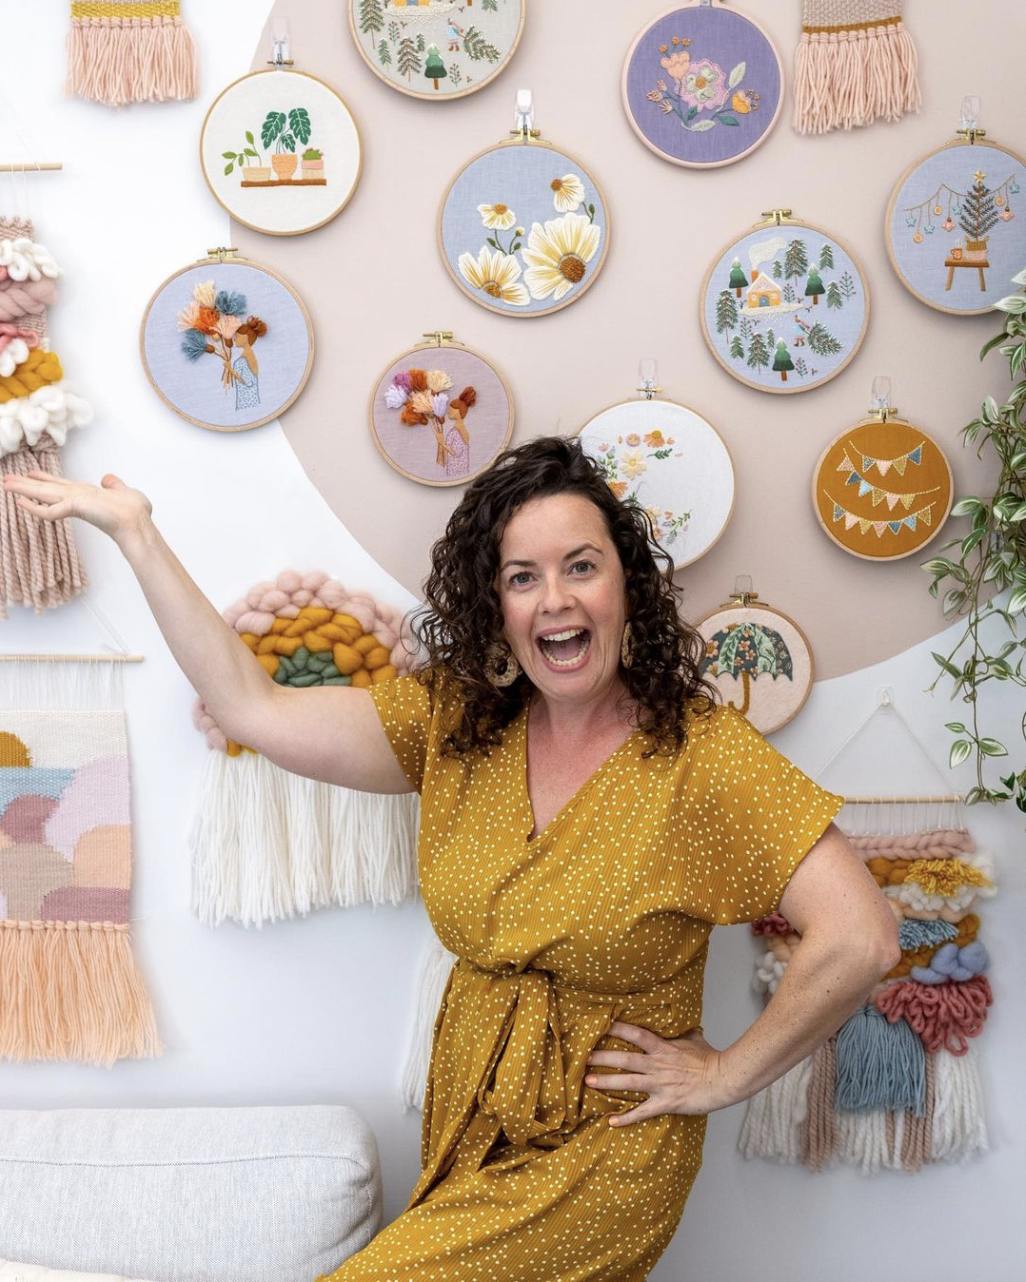 This is a picture of Clever Poppy creator Julie, gesturing to all her embroidery creations hanging on the wall.